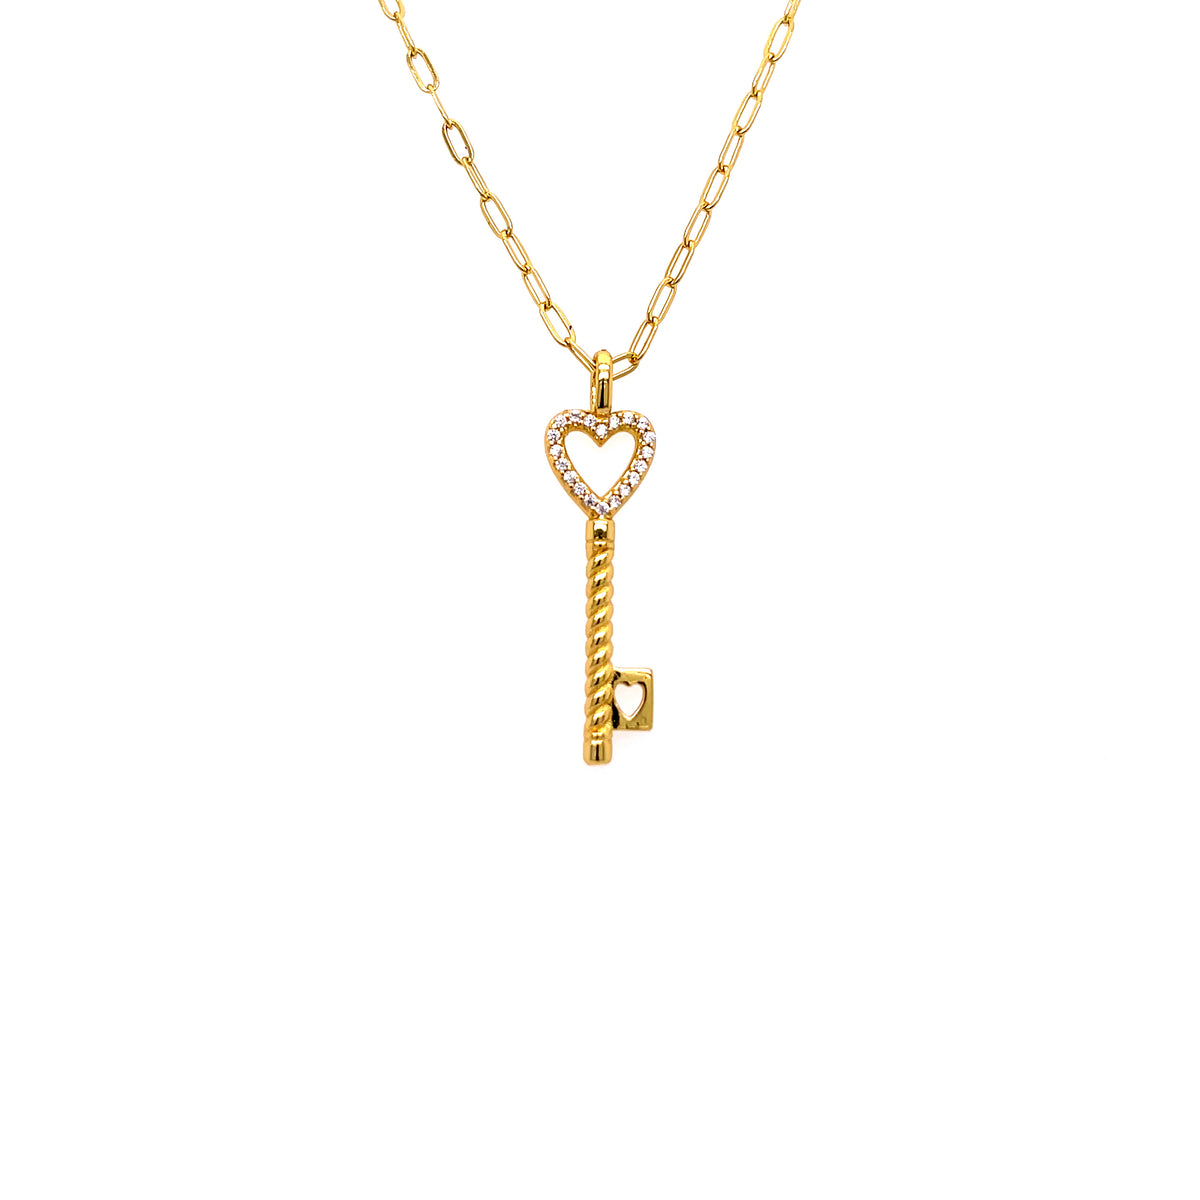 KEY OF HEART NECKLACE